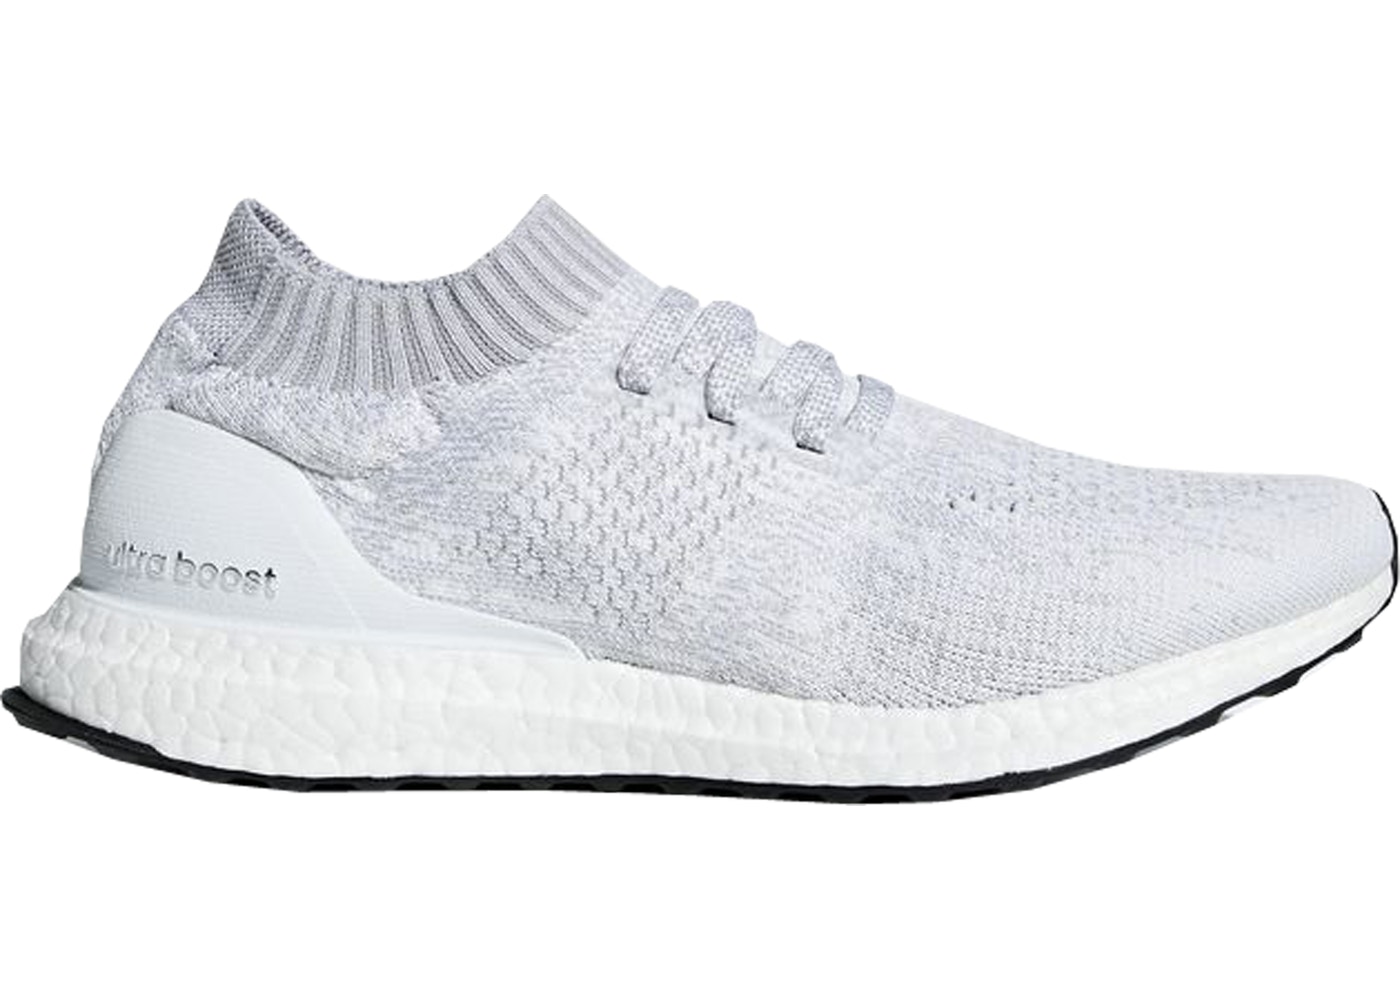 ultraboosts all white